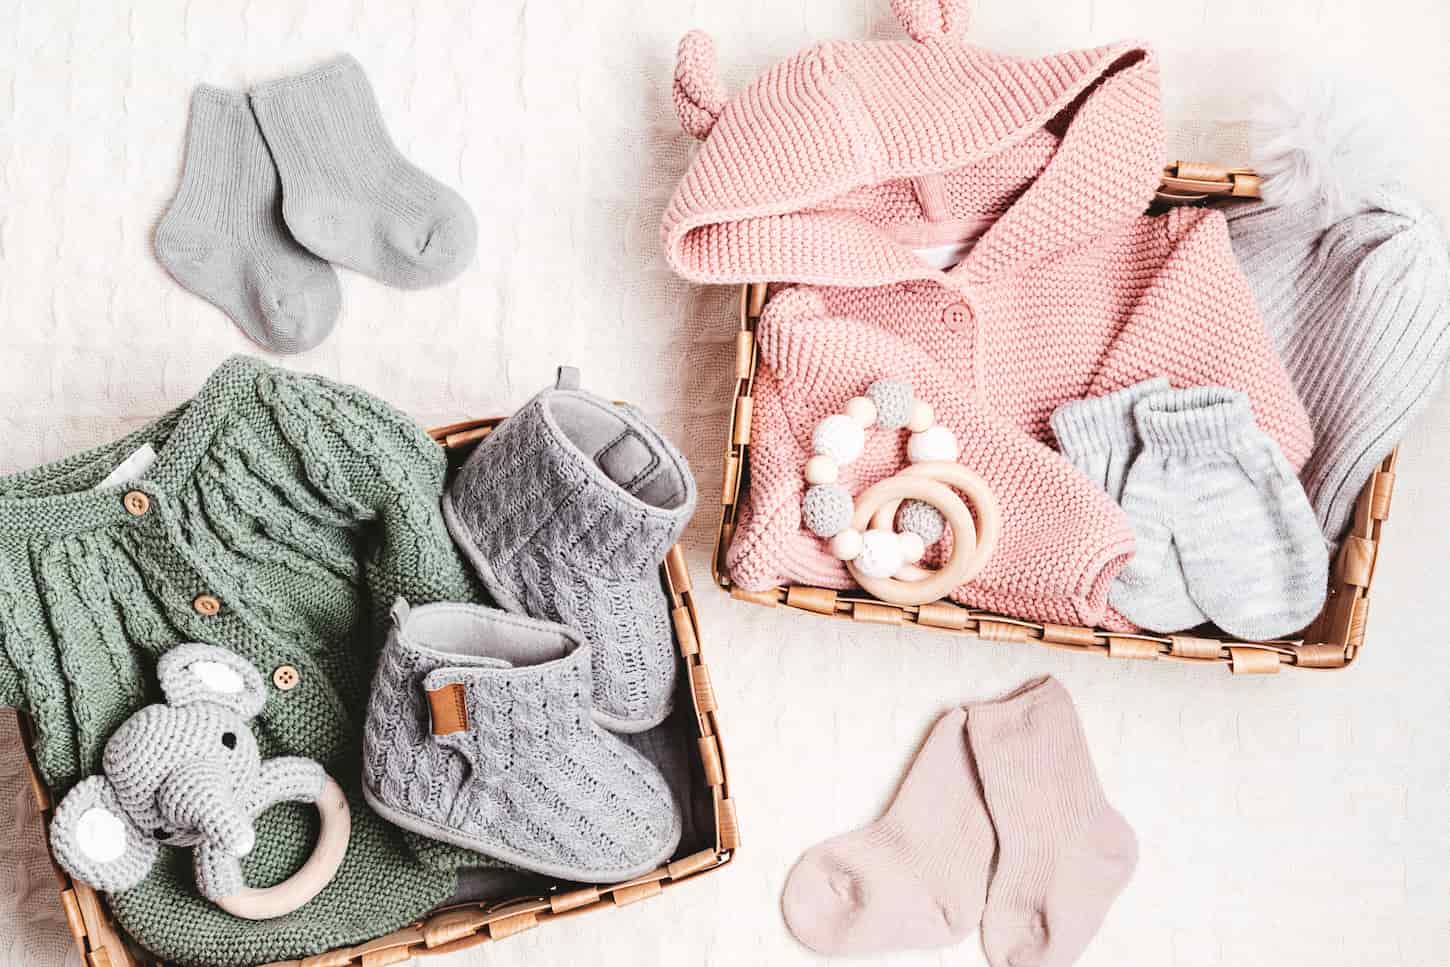 An image of a Set of cute organic baby clothes, toys, and booties. Heartwarming present for cold weather.